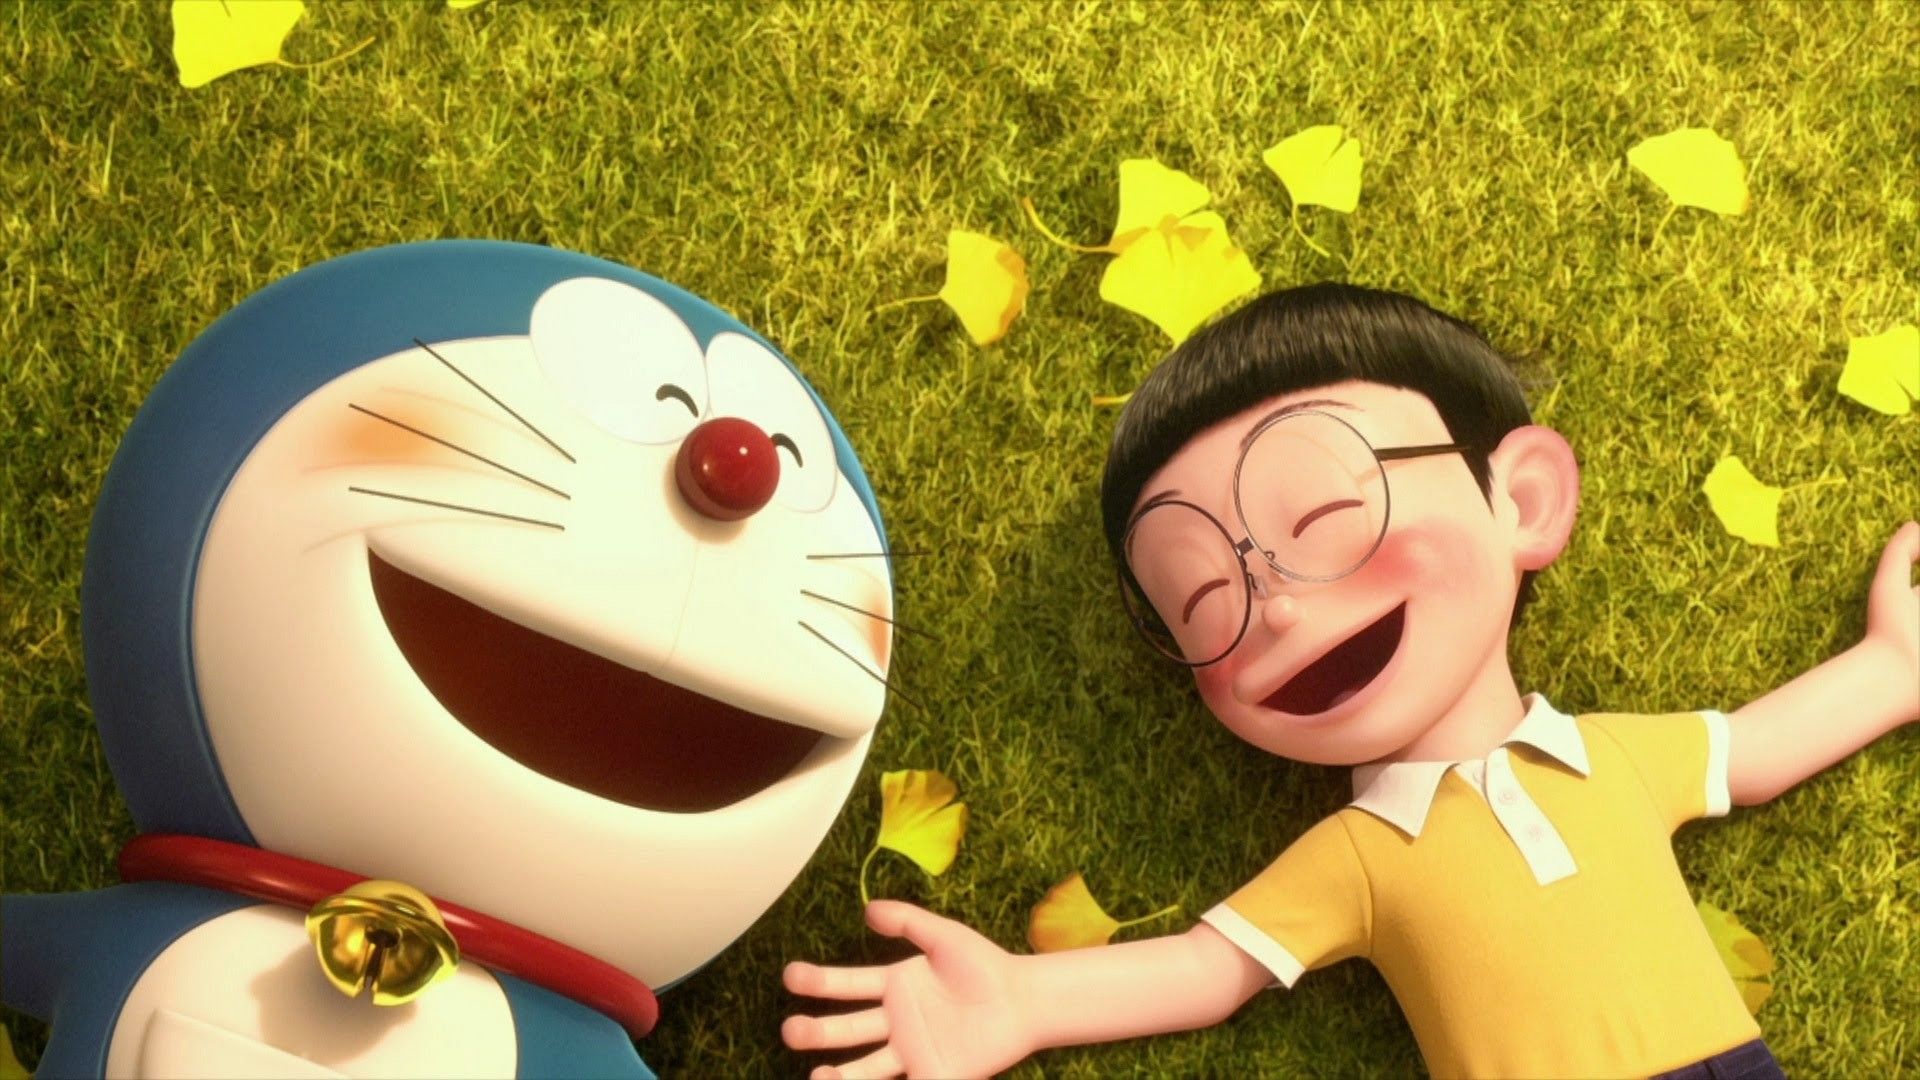 Stand By Me Doraemon 2 CG: Two Cast Members Added For Cameo In Anime Film!